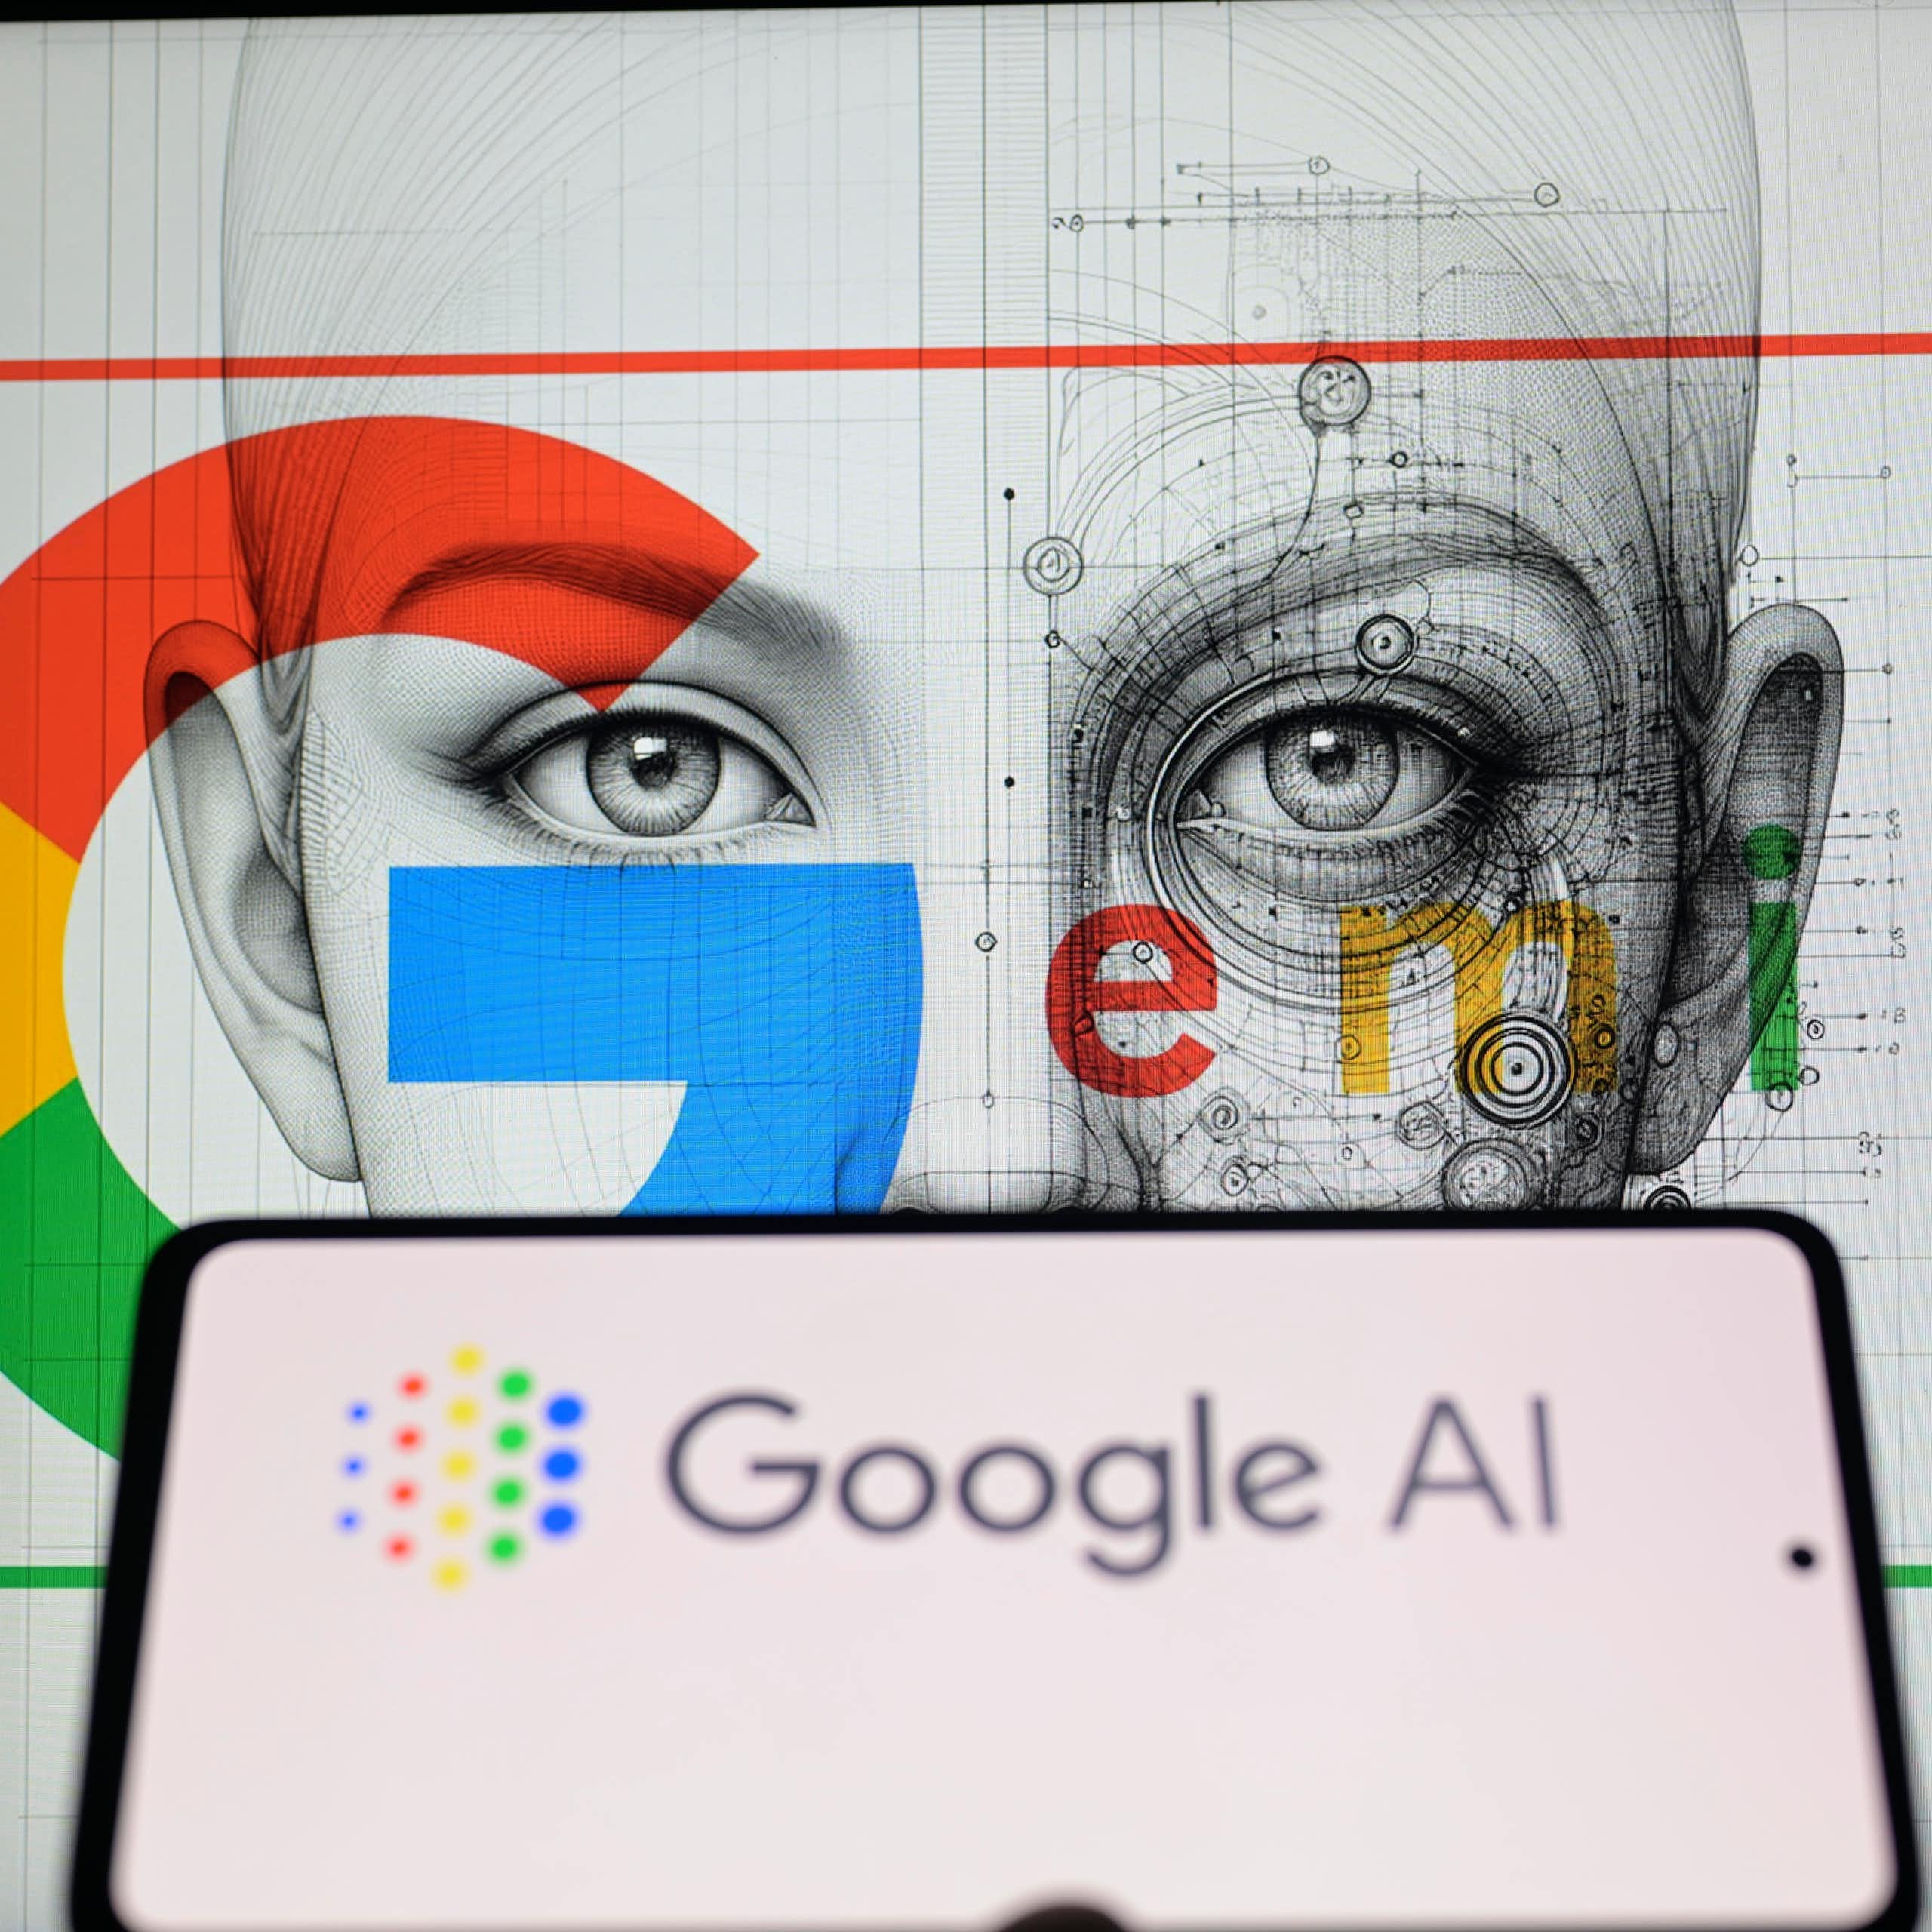 a screen with the text Google AI is in the foreground, in the background "Gemini" is written using Google's branding style